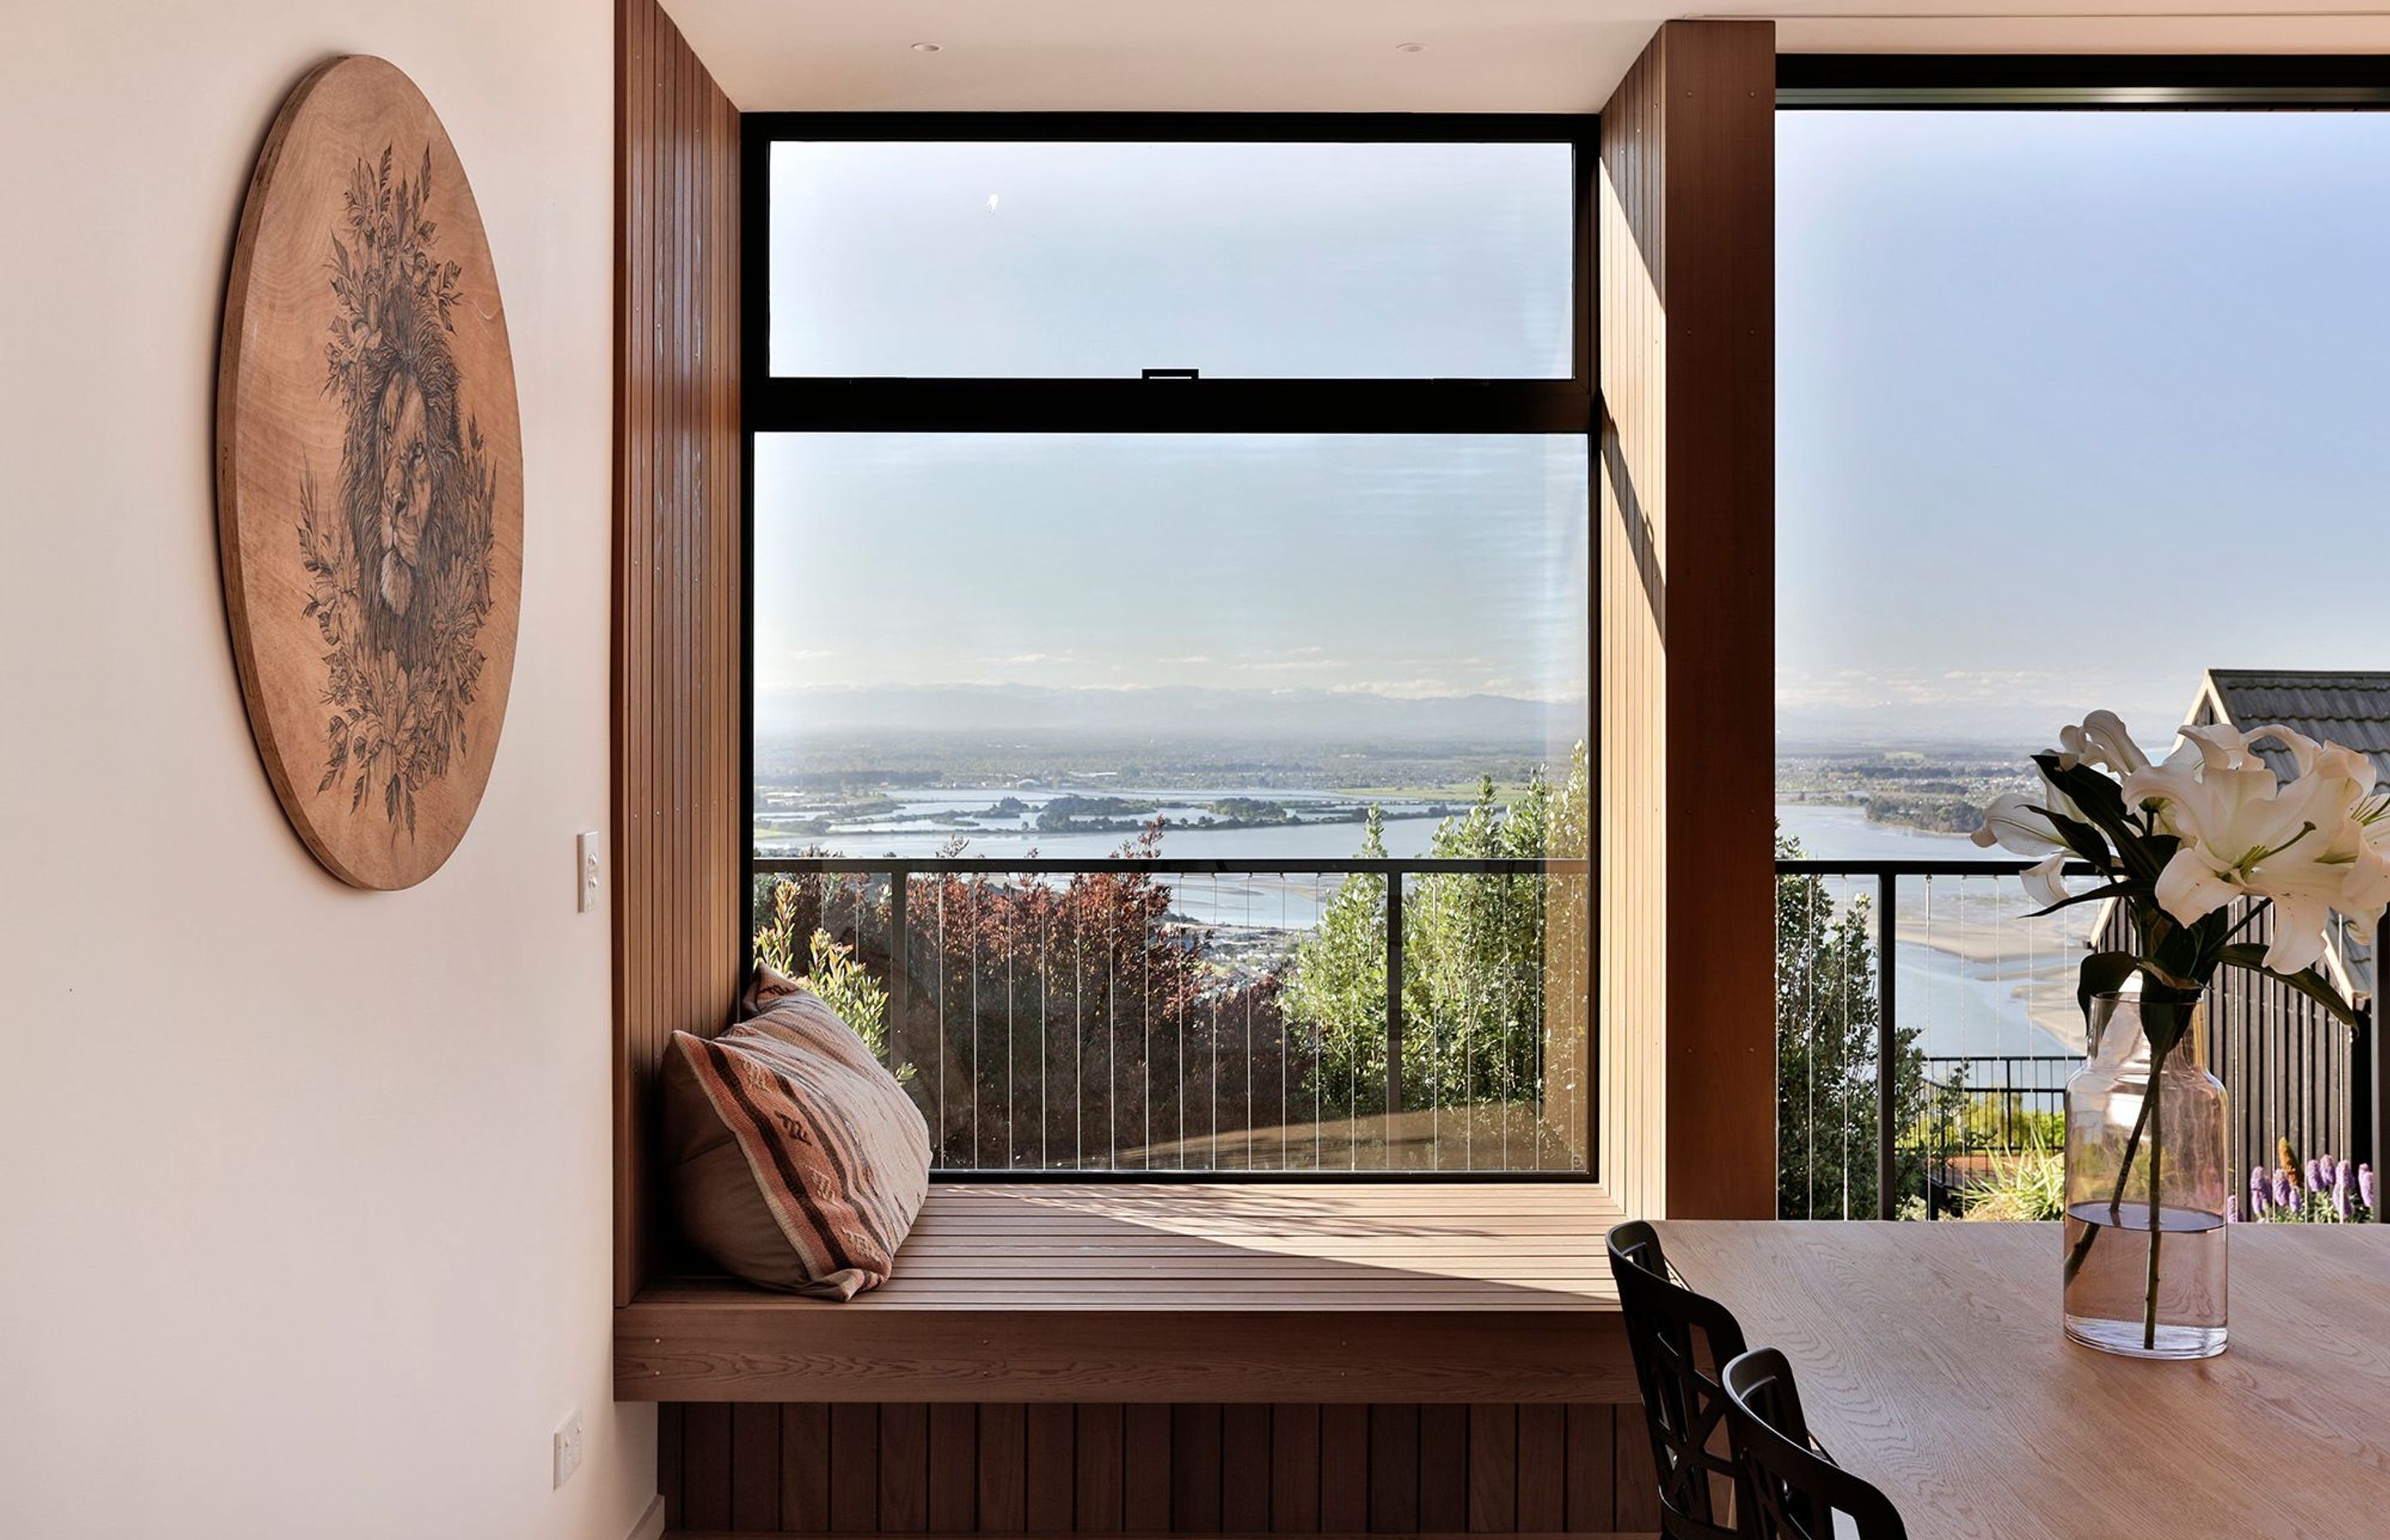 A day bed is recessed into the window, providing the ultimate spot to curl up and read a book or enjoy a glass of wine.